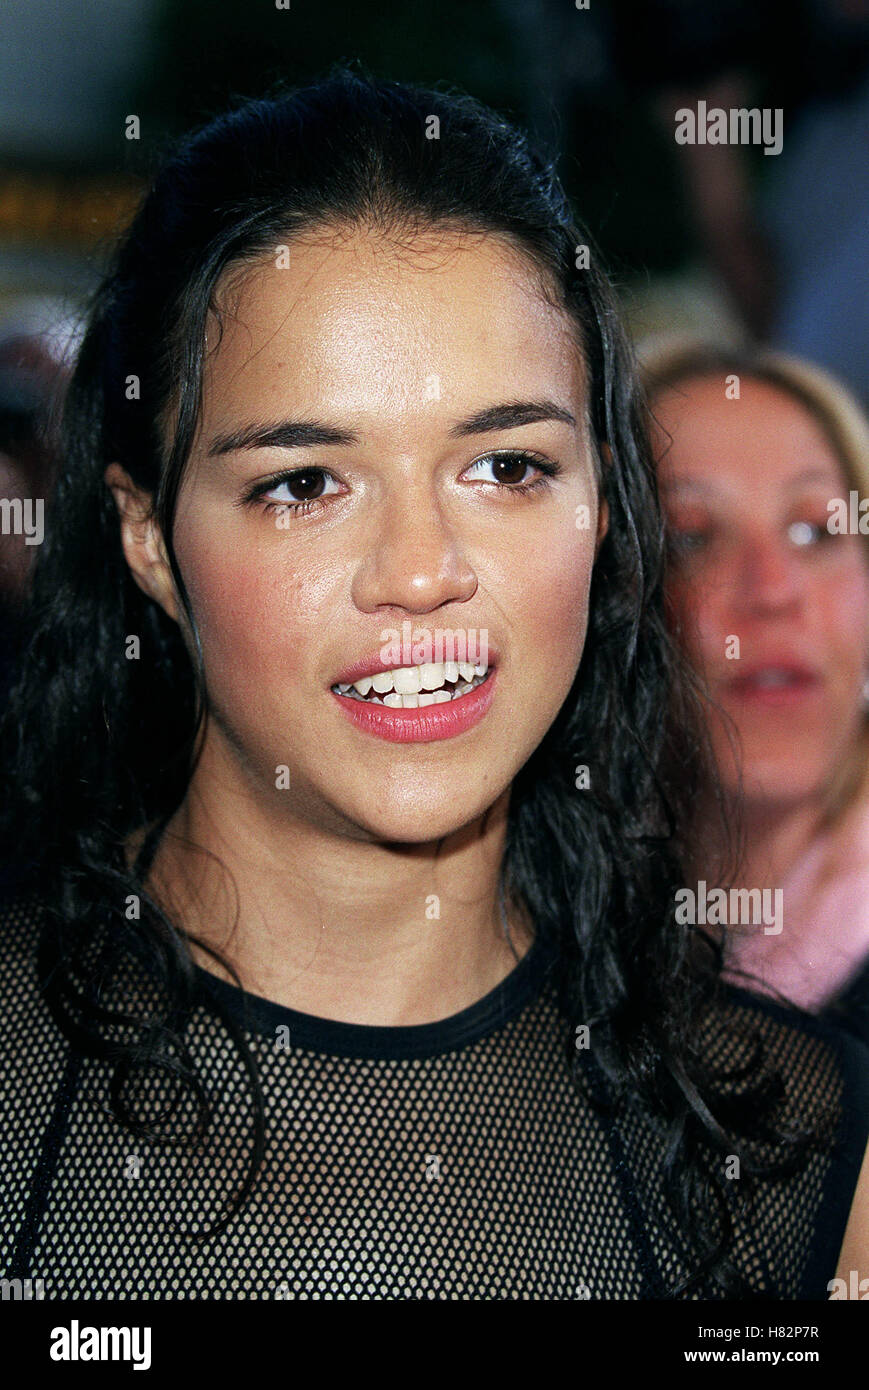 MICHELLE RODRIGUEZ "FAST AND FURIOUS" Filmpremiere LOS ANGELES USA 18. Juni 2001 Stockfoto